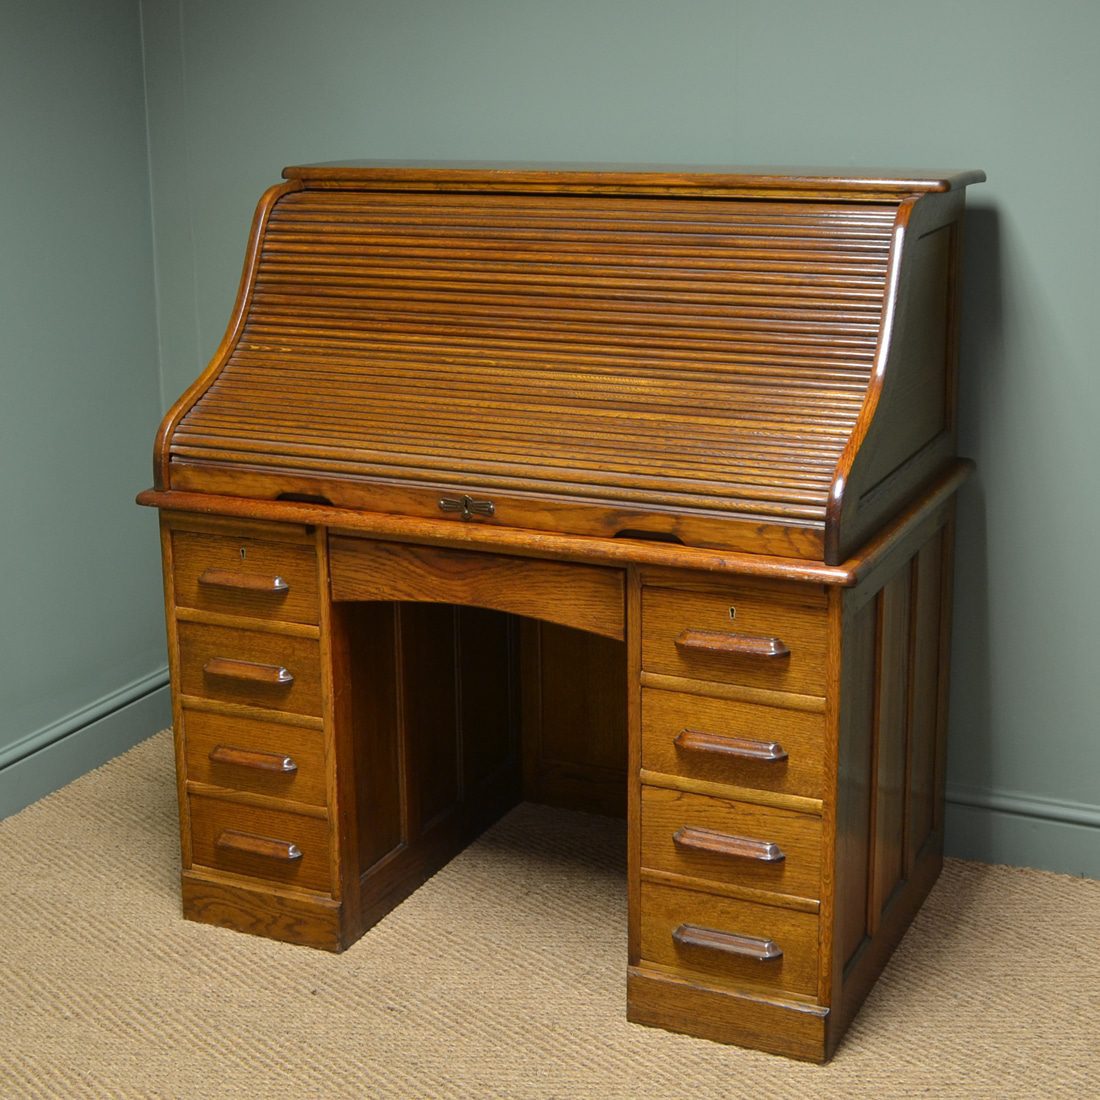 Tall Large Edwardian Oak Antique Roll Top Desk dates from ca. 1900 and is full of beautiful charm and character